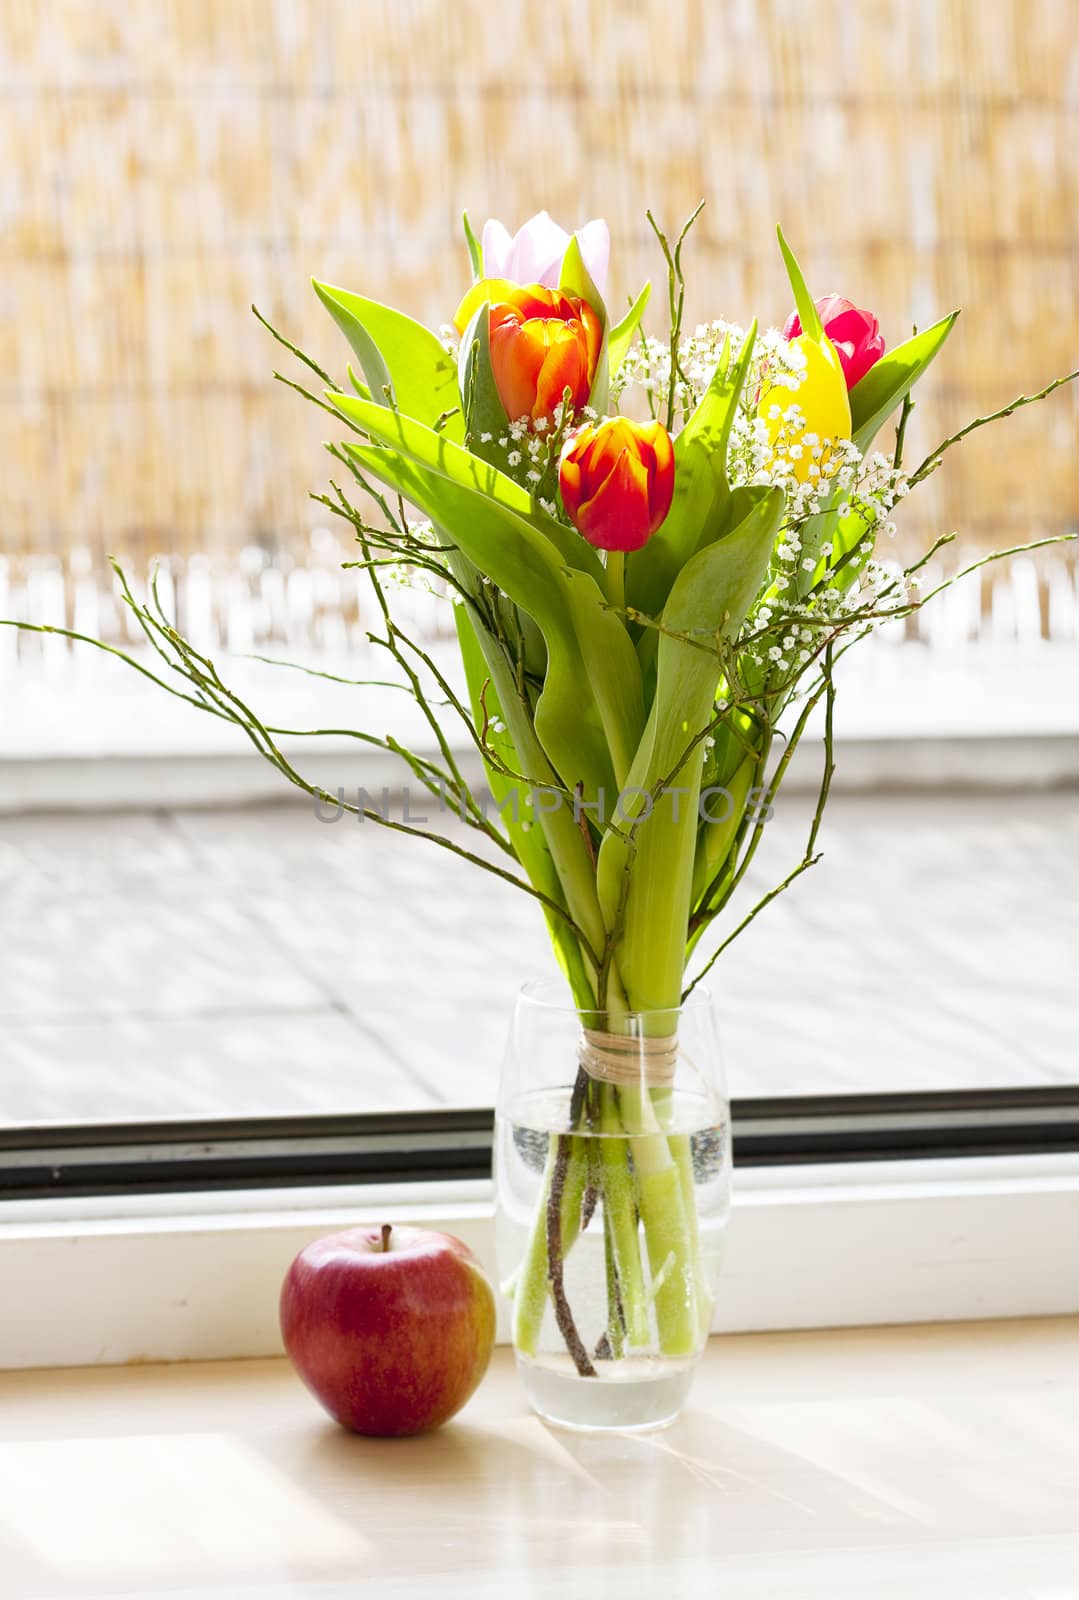 spring bouquet with tulips and an apple